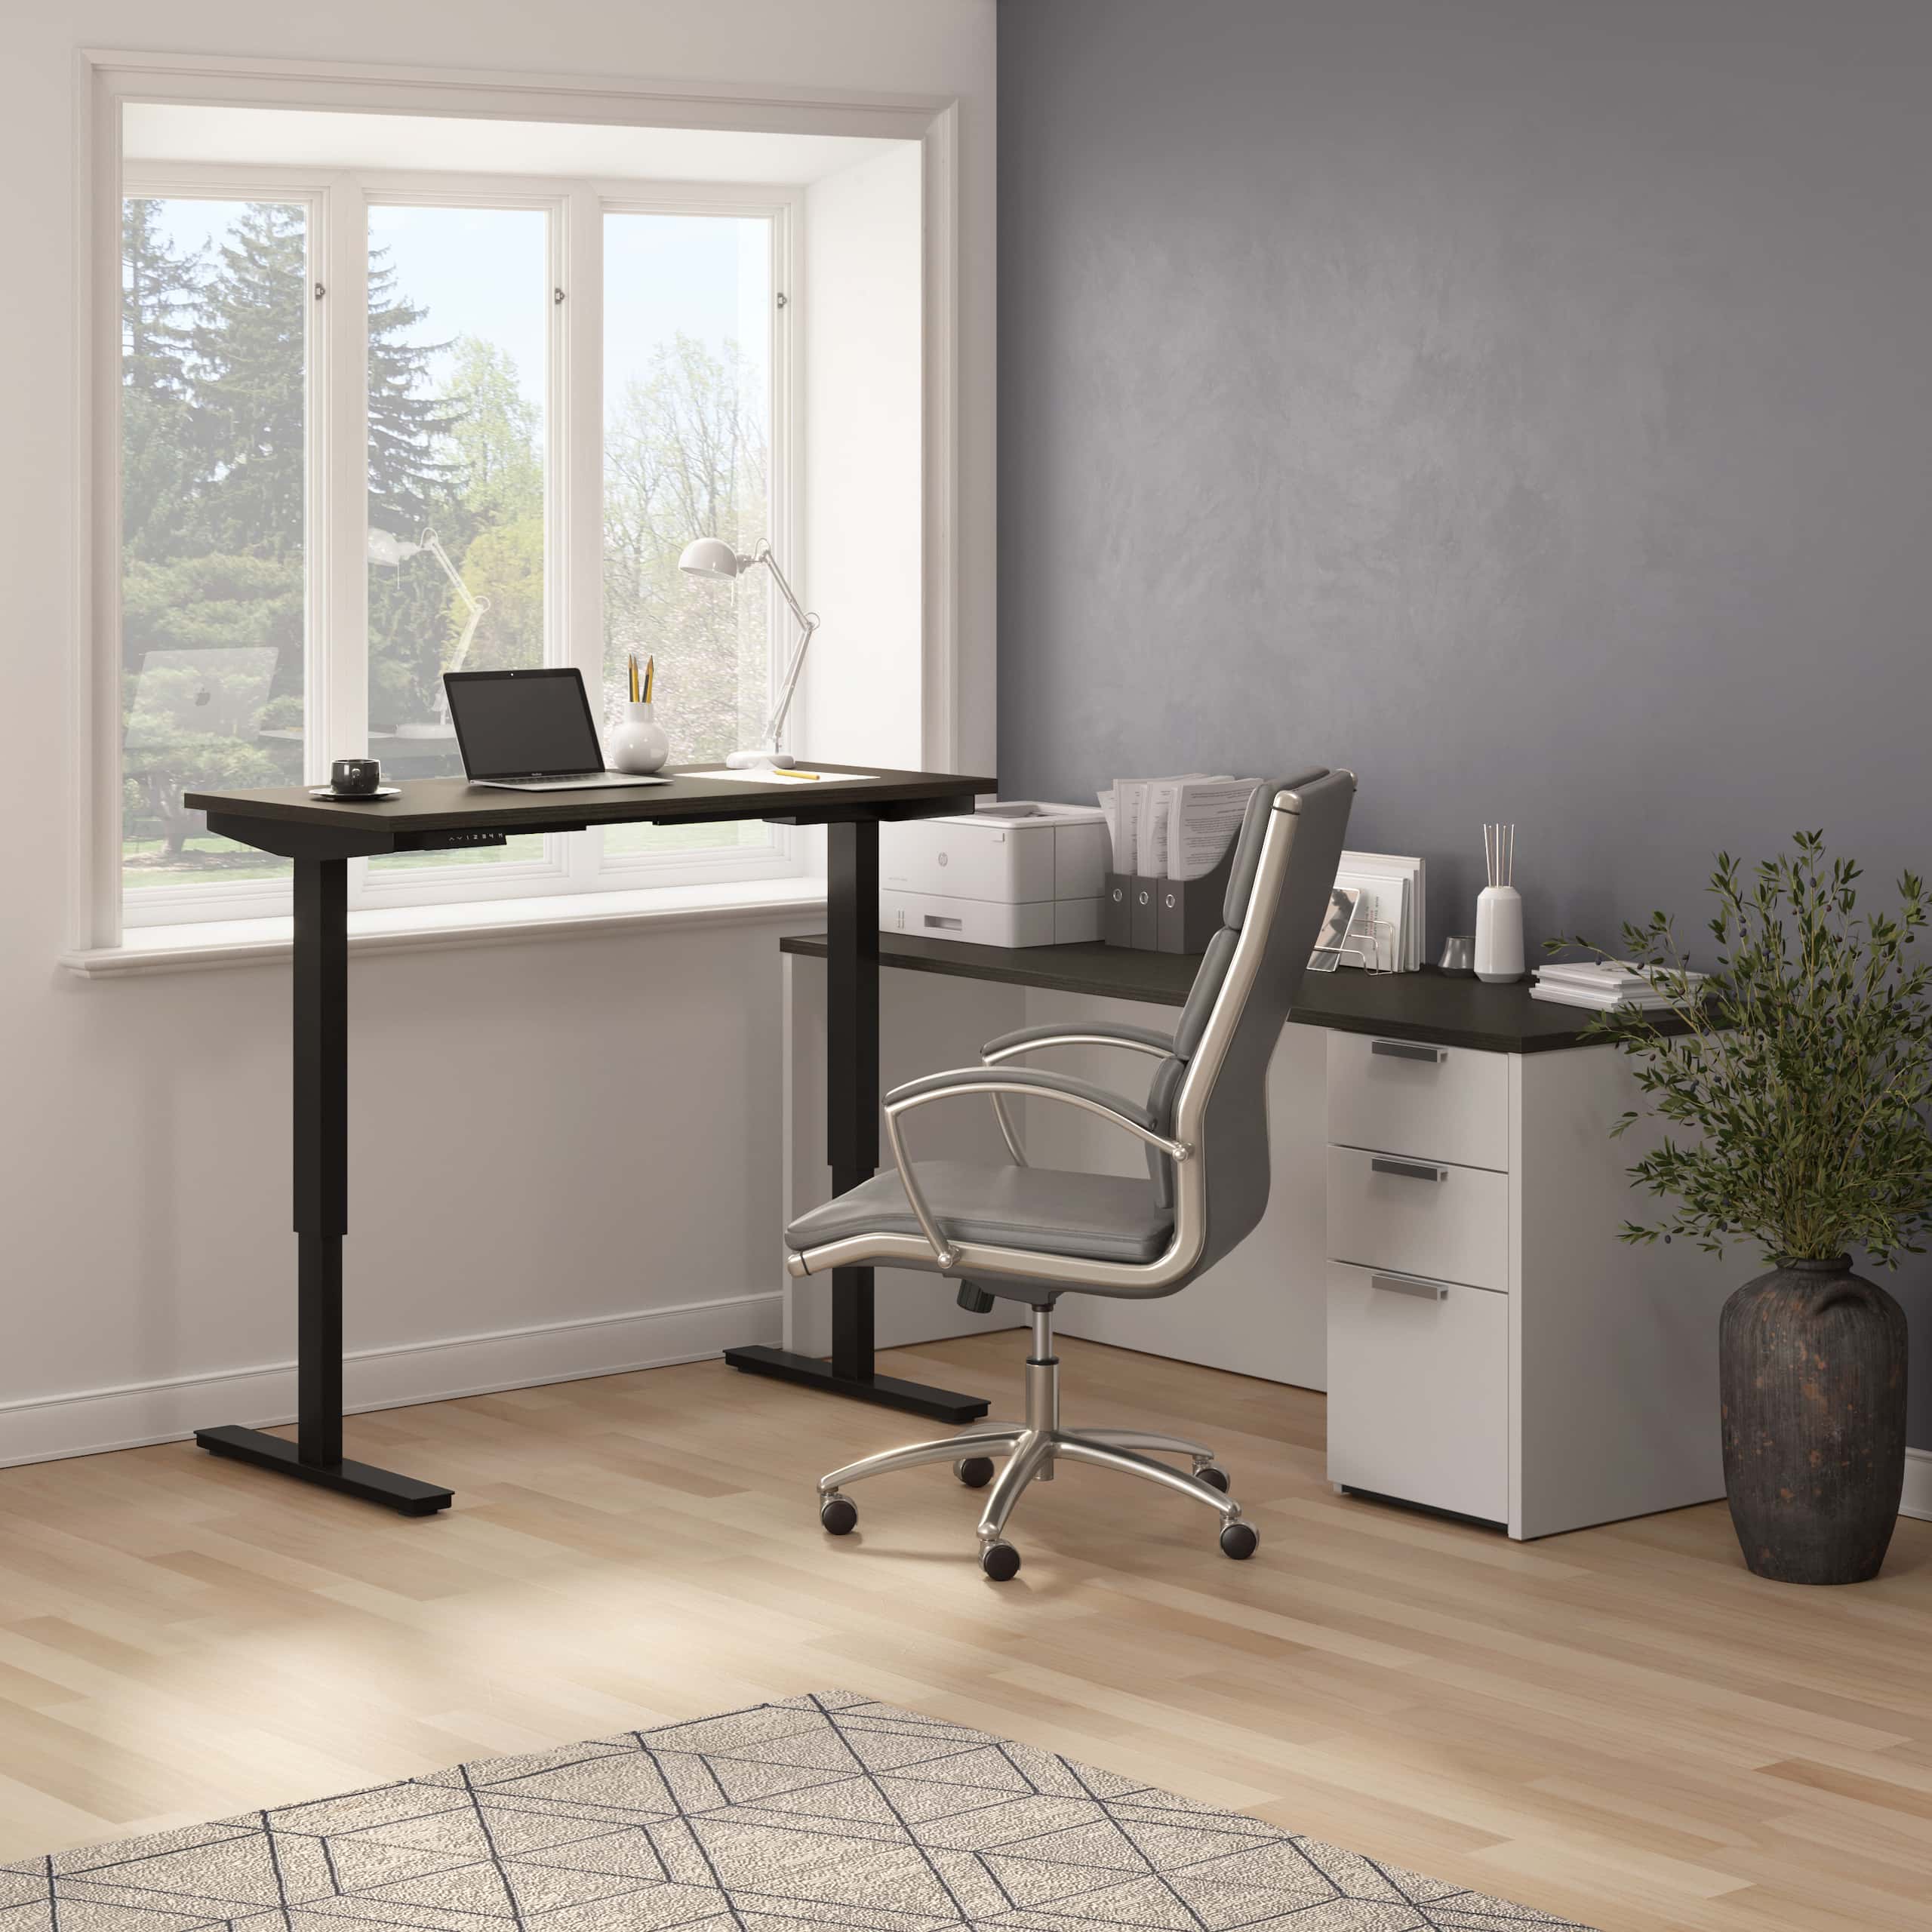 7 Things to Consider When Buying an Electric Standing Desk